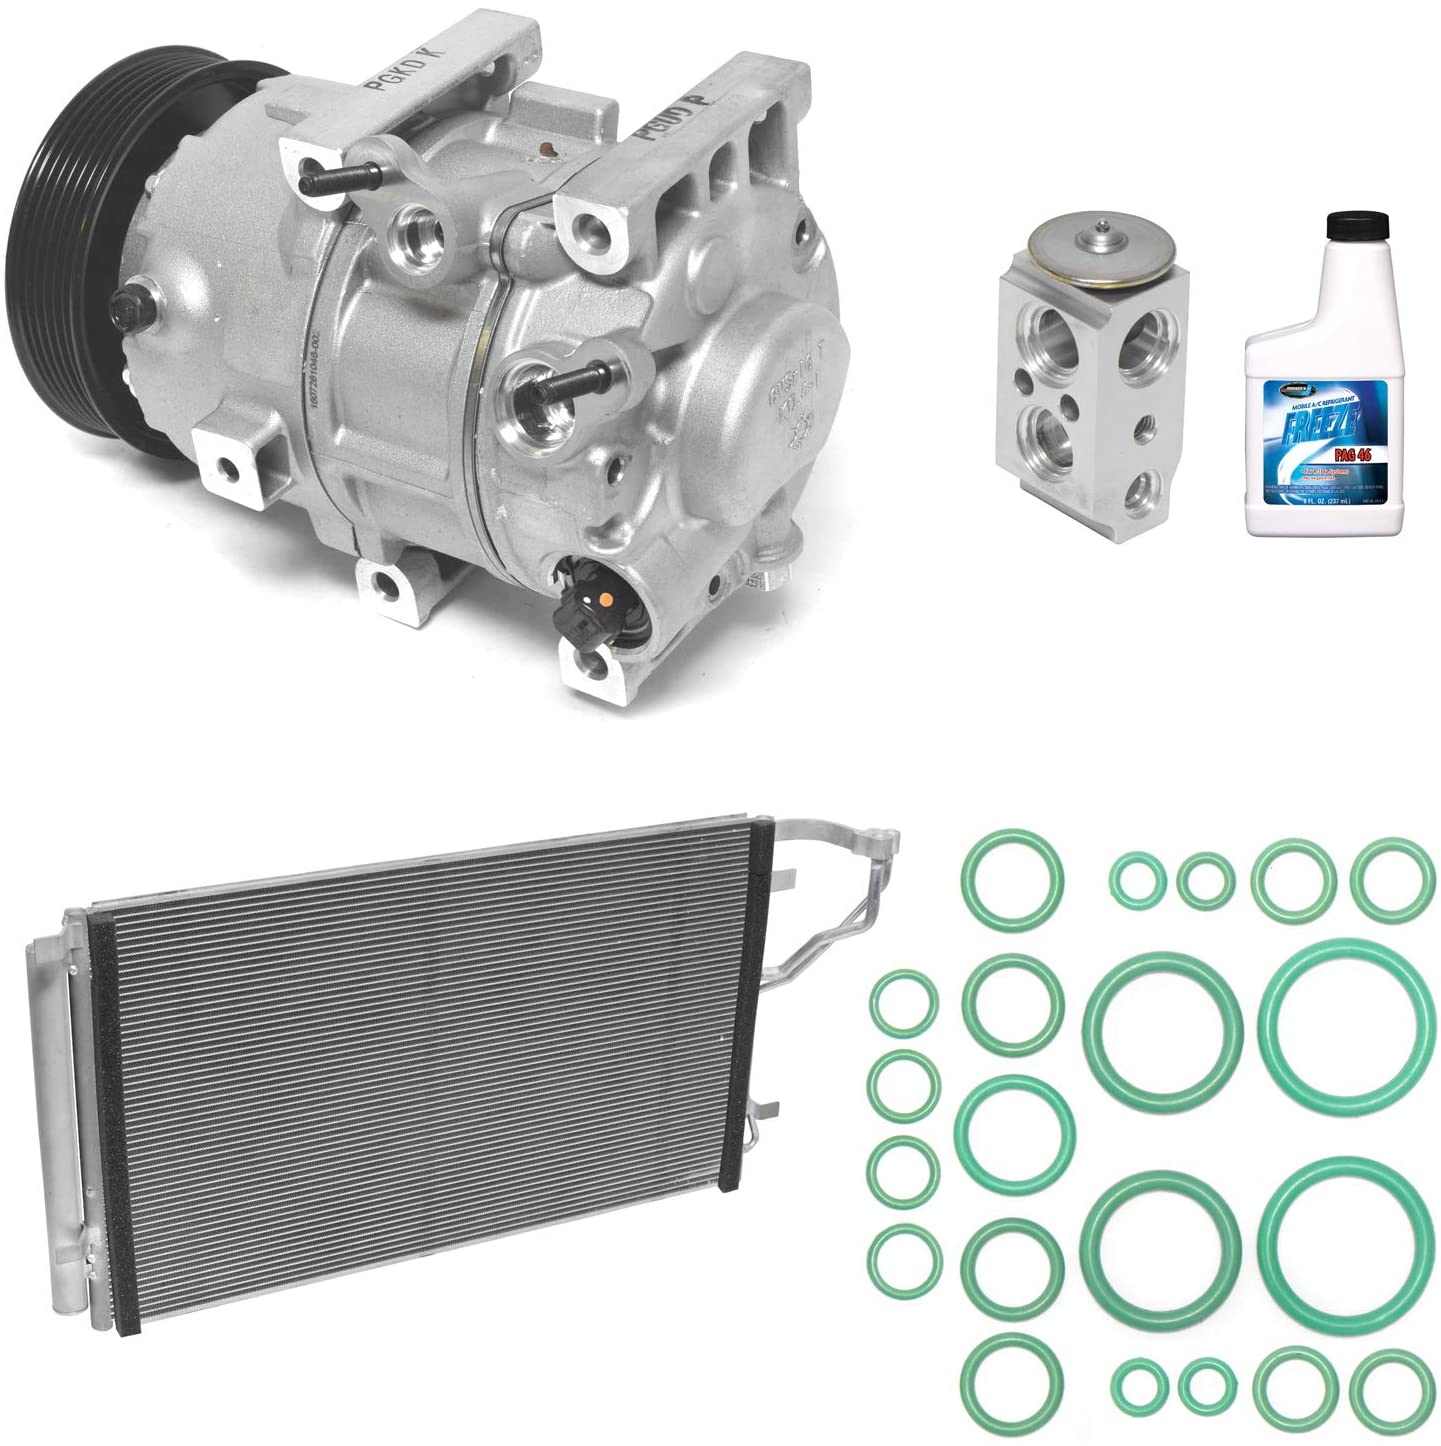 New A/C Compressor and Component Kit KT 4753A - For Sonata Optima